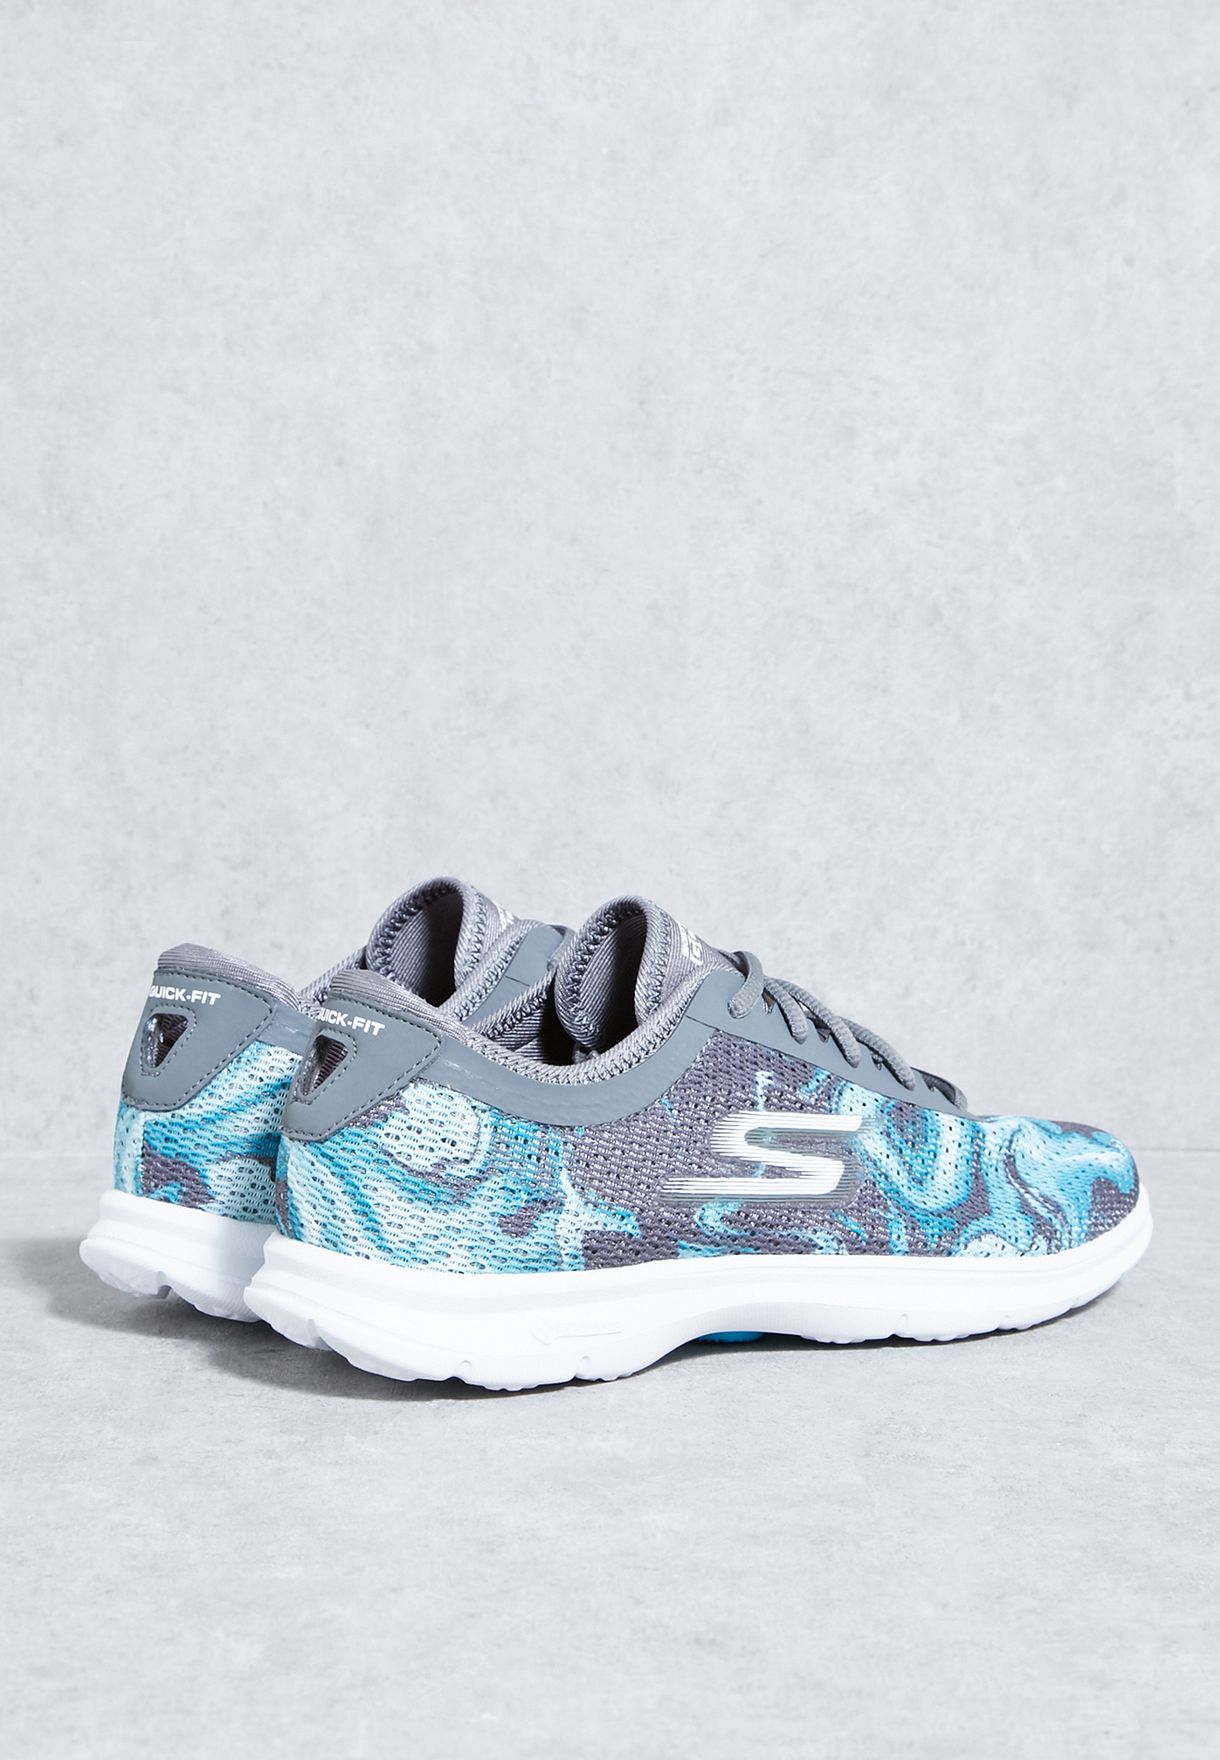 skechers go step quick fit